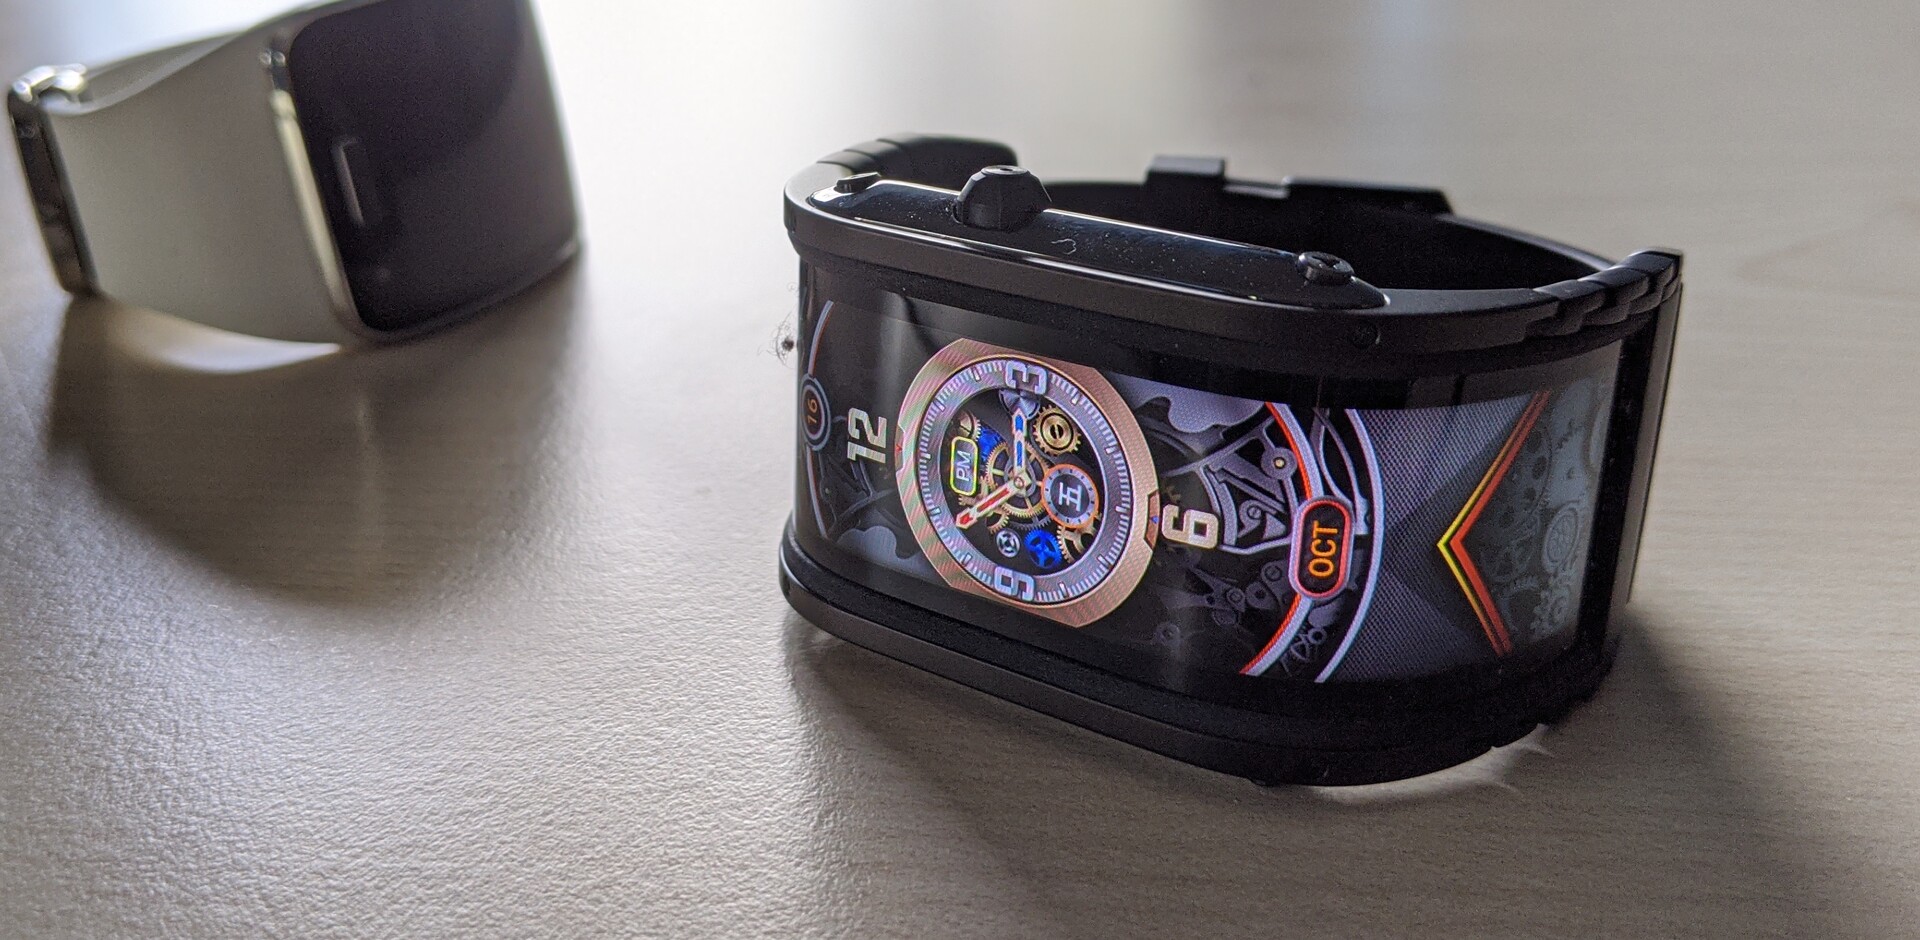 Nubia Watch Smartwatch Review: The successor of the 